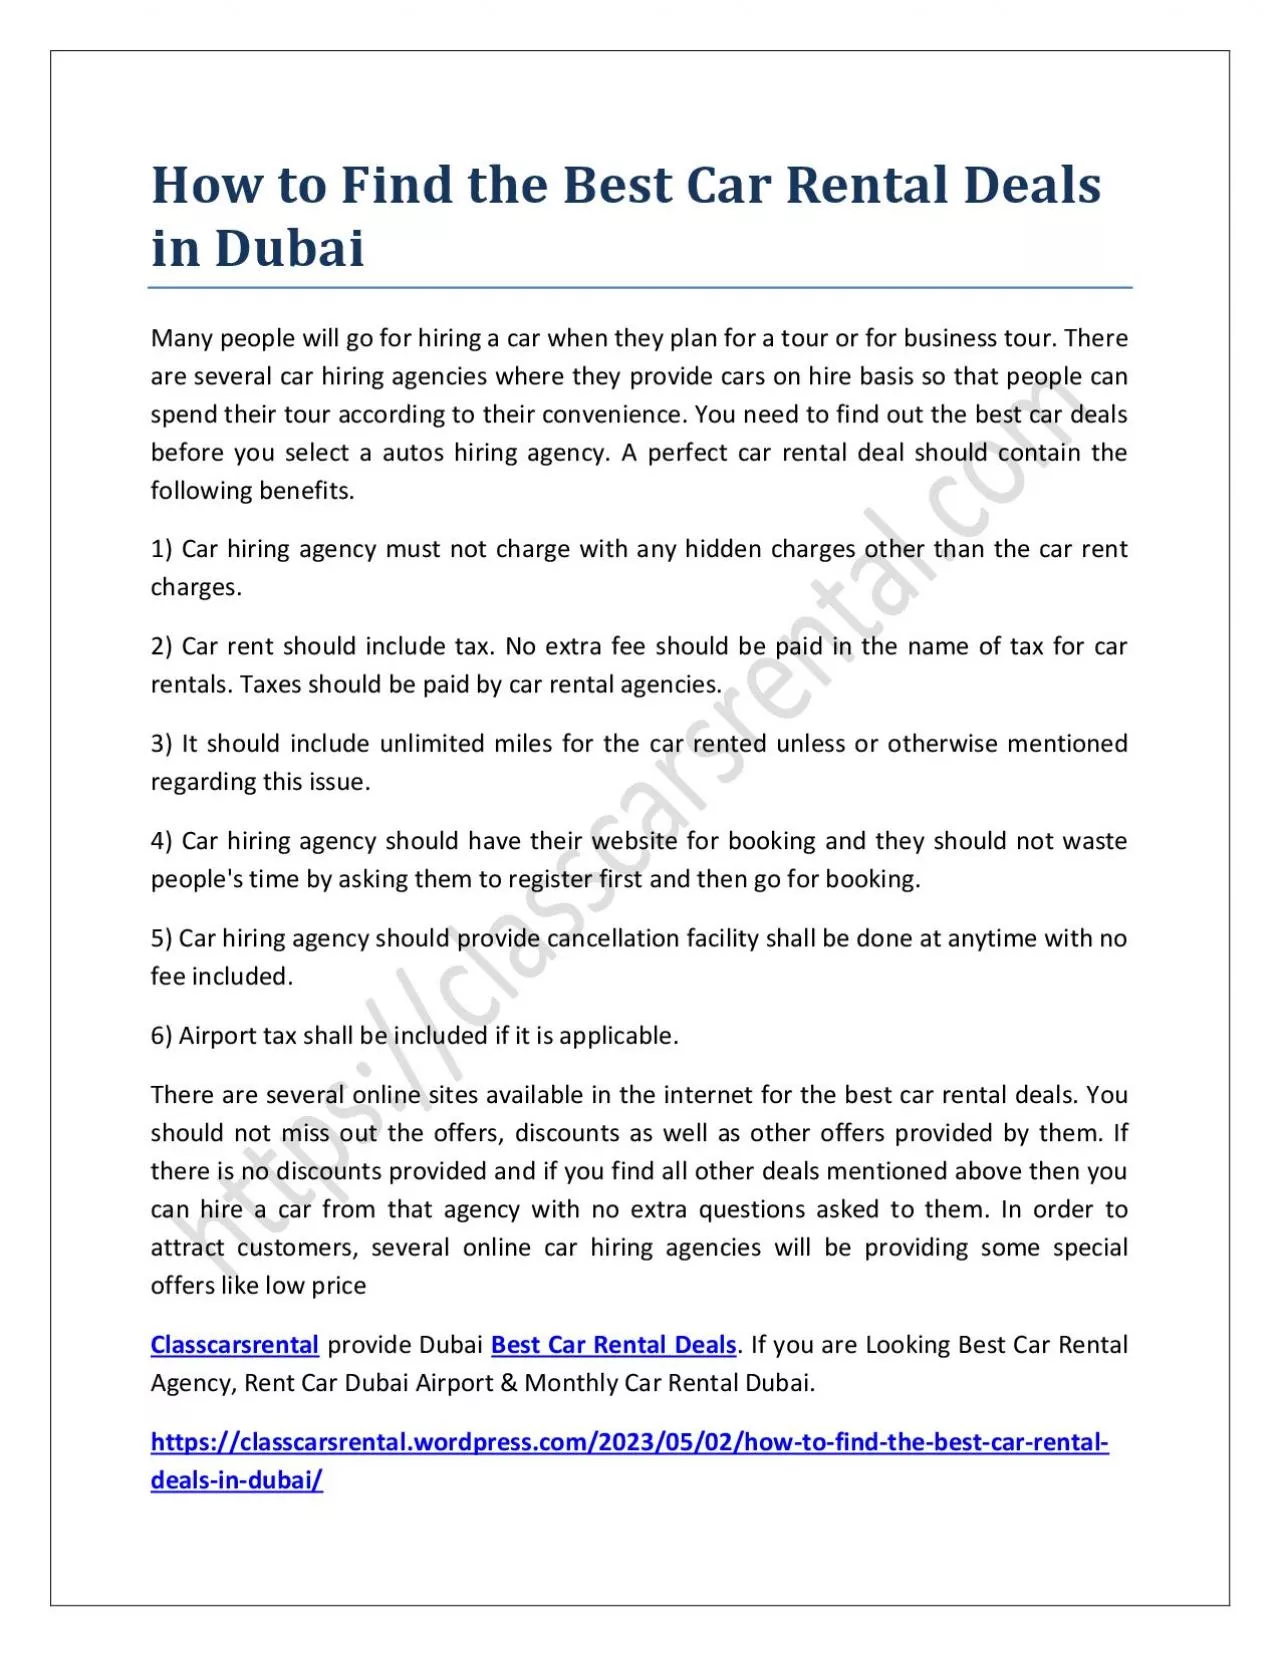 How to Find the Best Car Rental Deals in Dubai